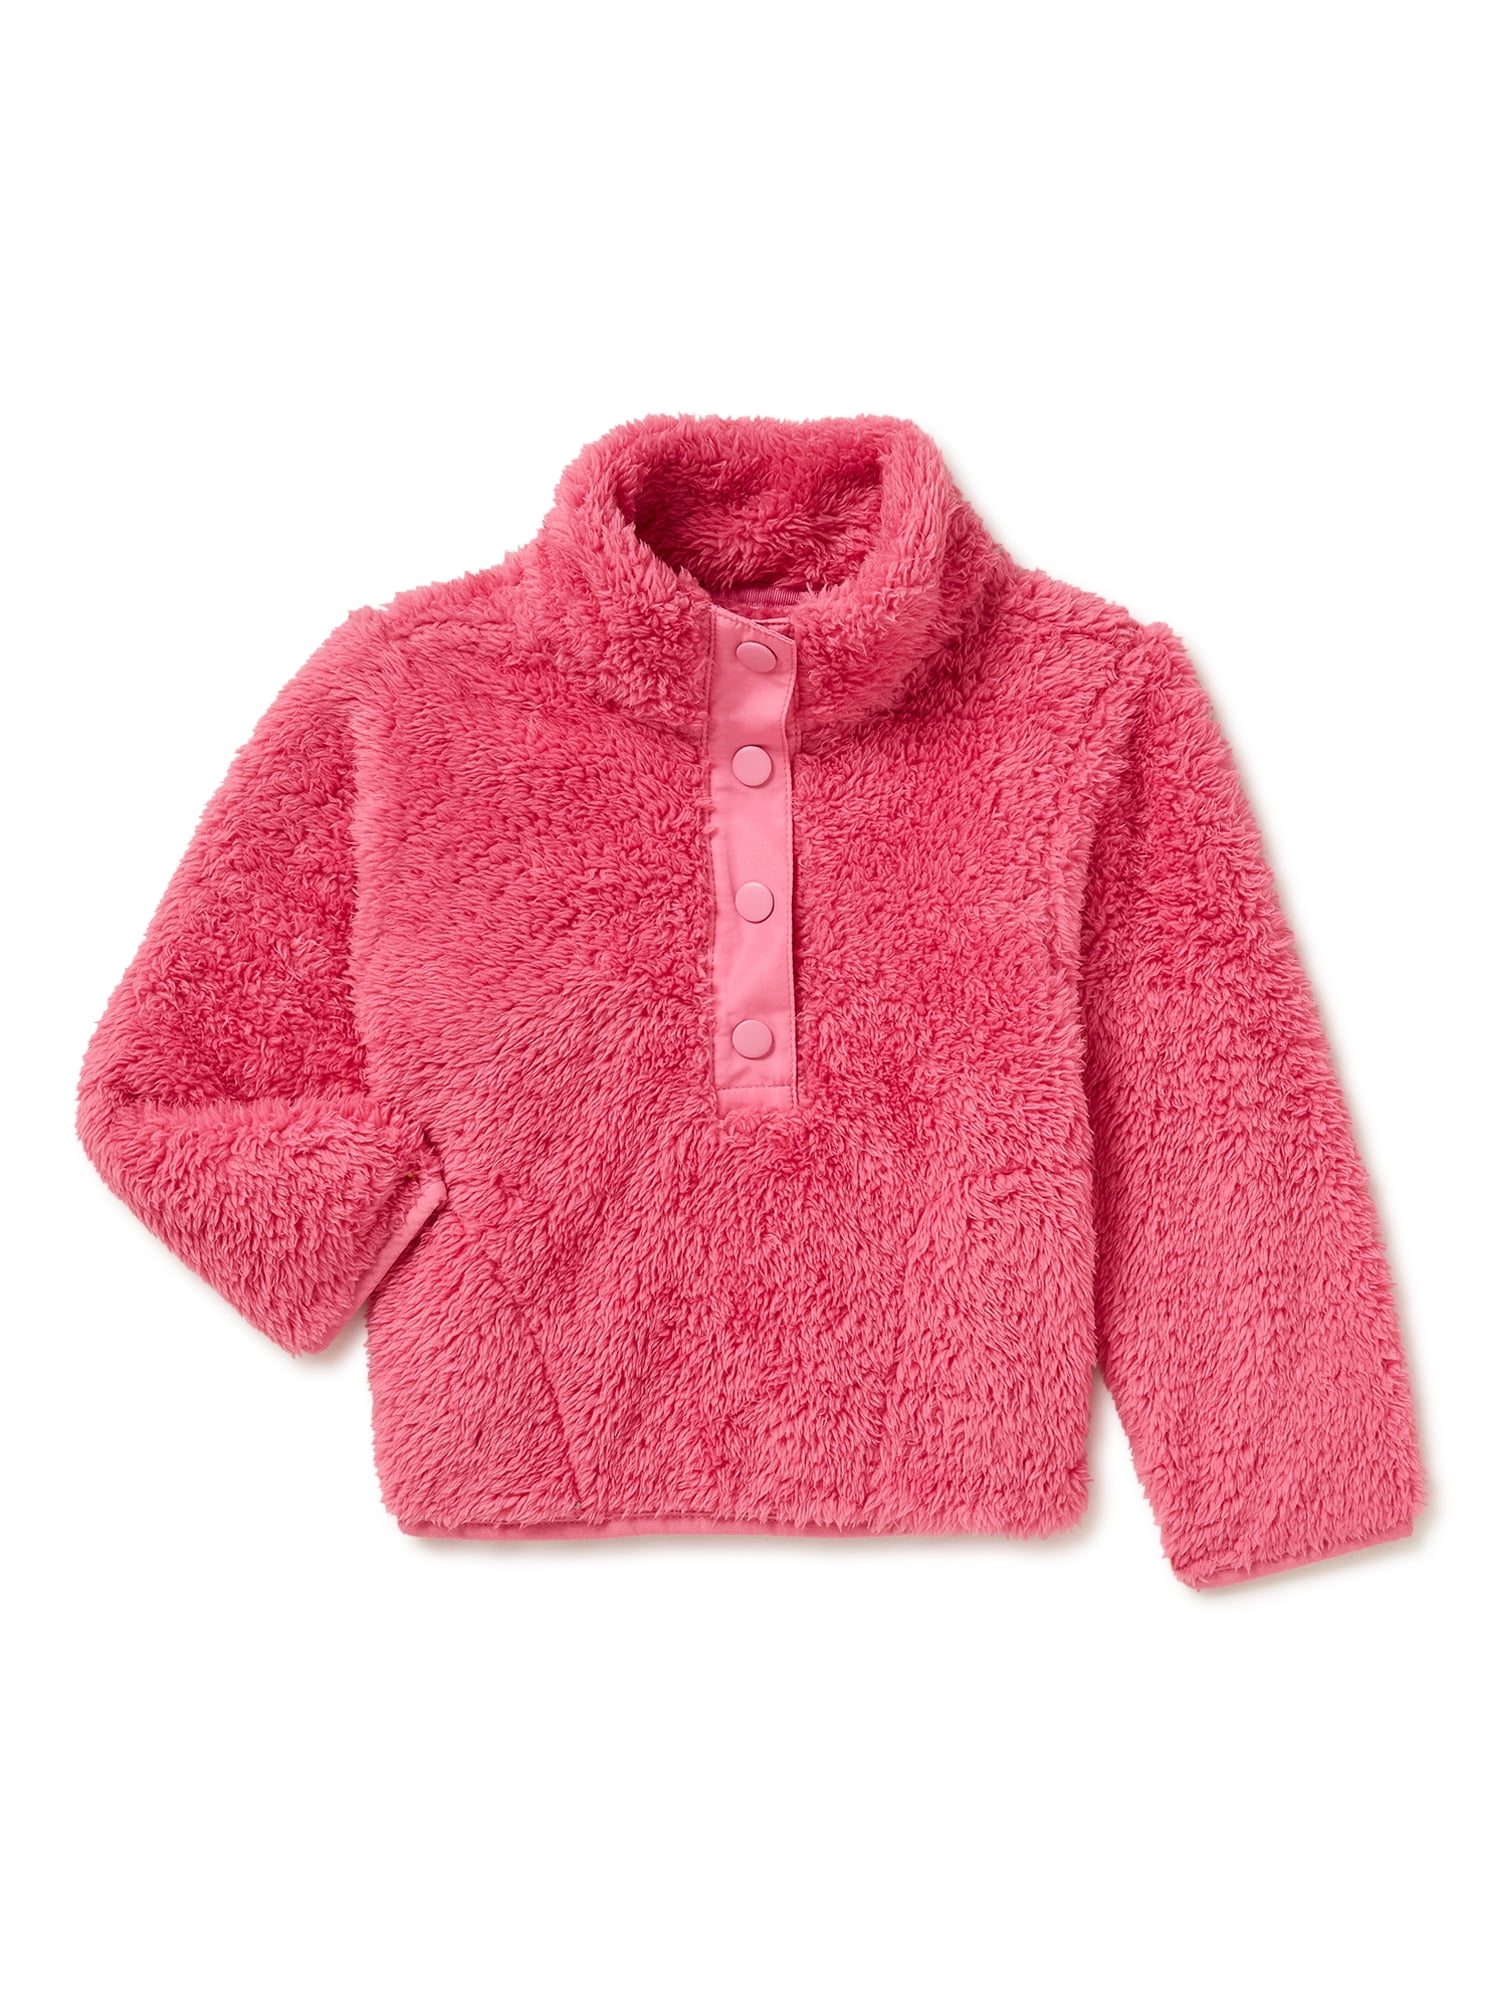 Wonder Nation Baby and Toddler Sherpa Pullover Jacket, Sizes 12M-5T ...